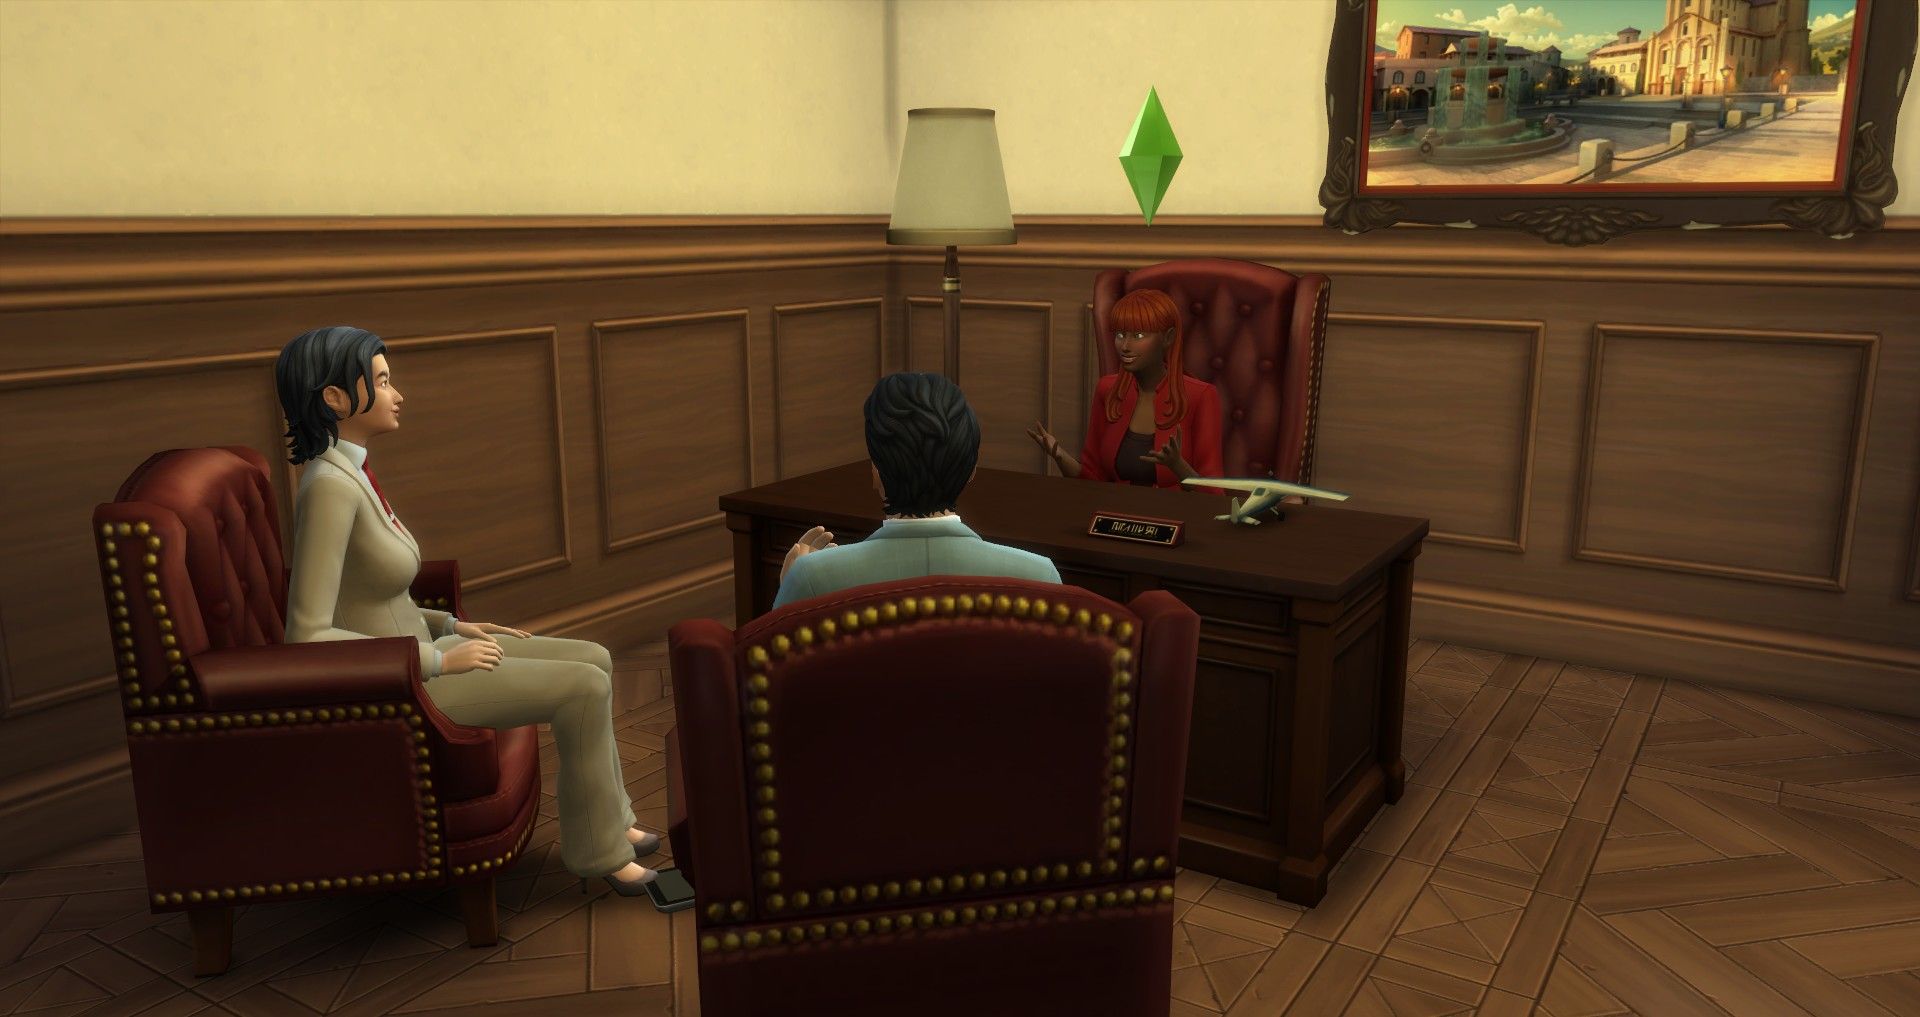 sims having a meeting in an office the sims 4 business career